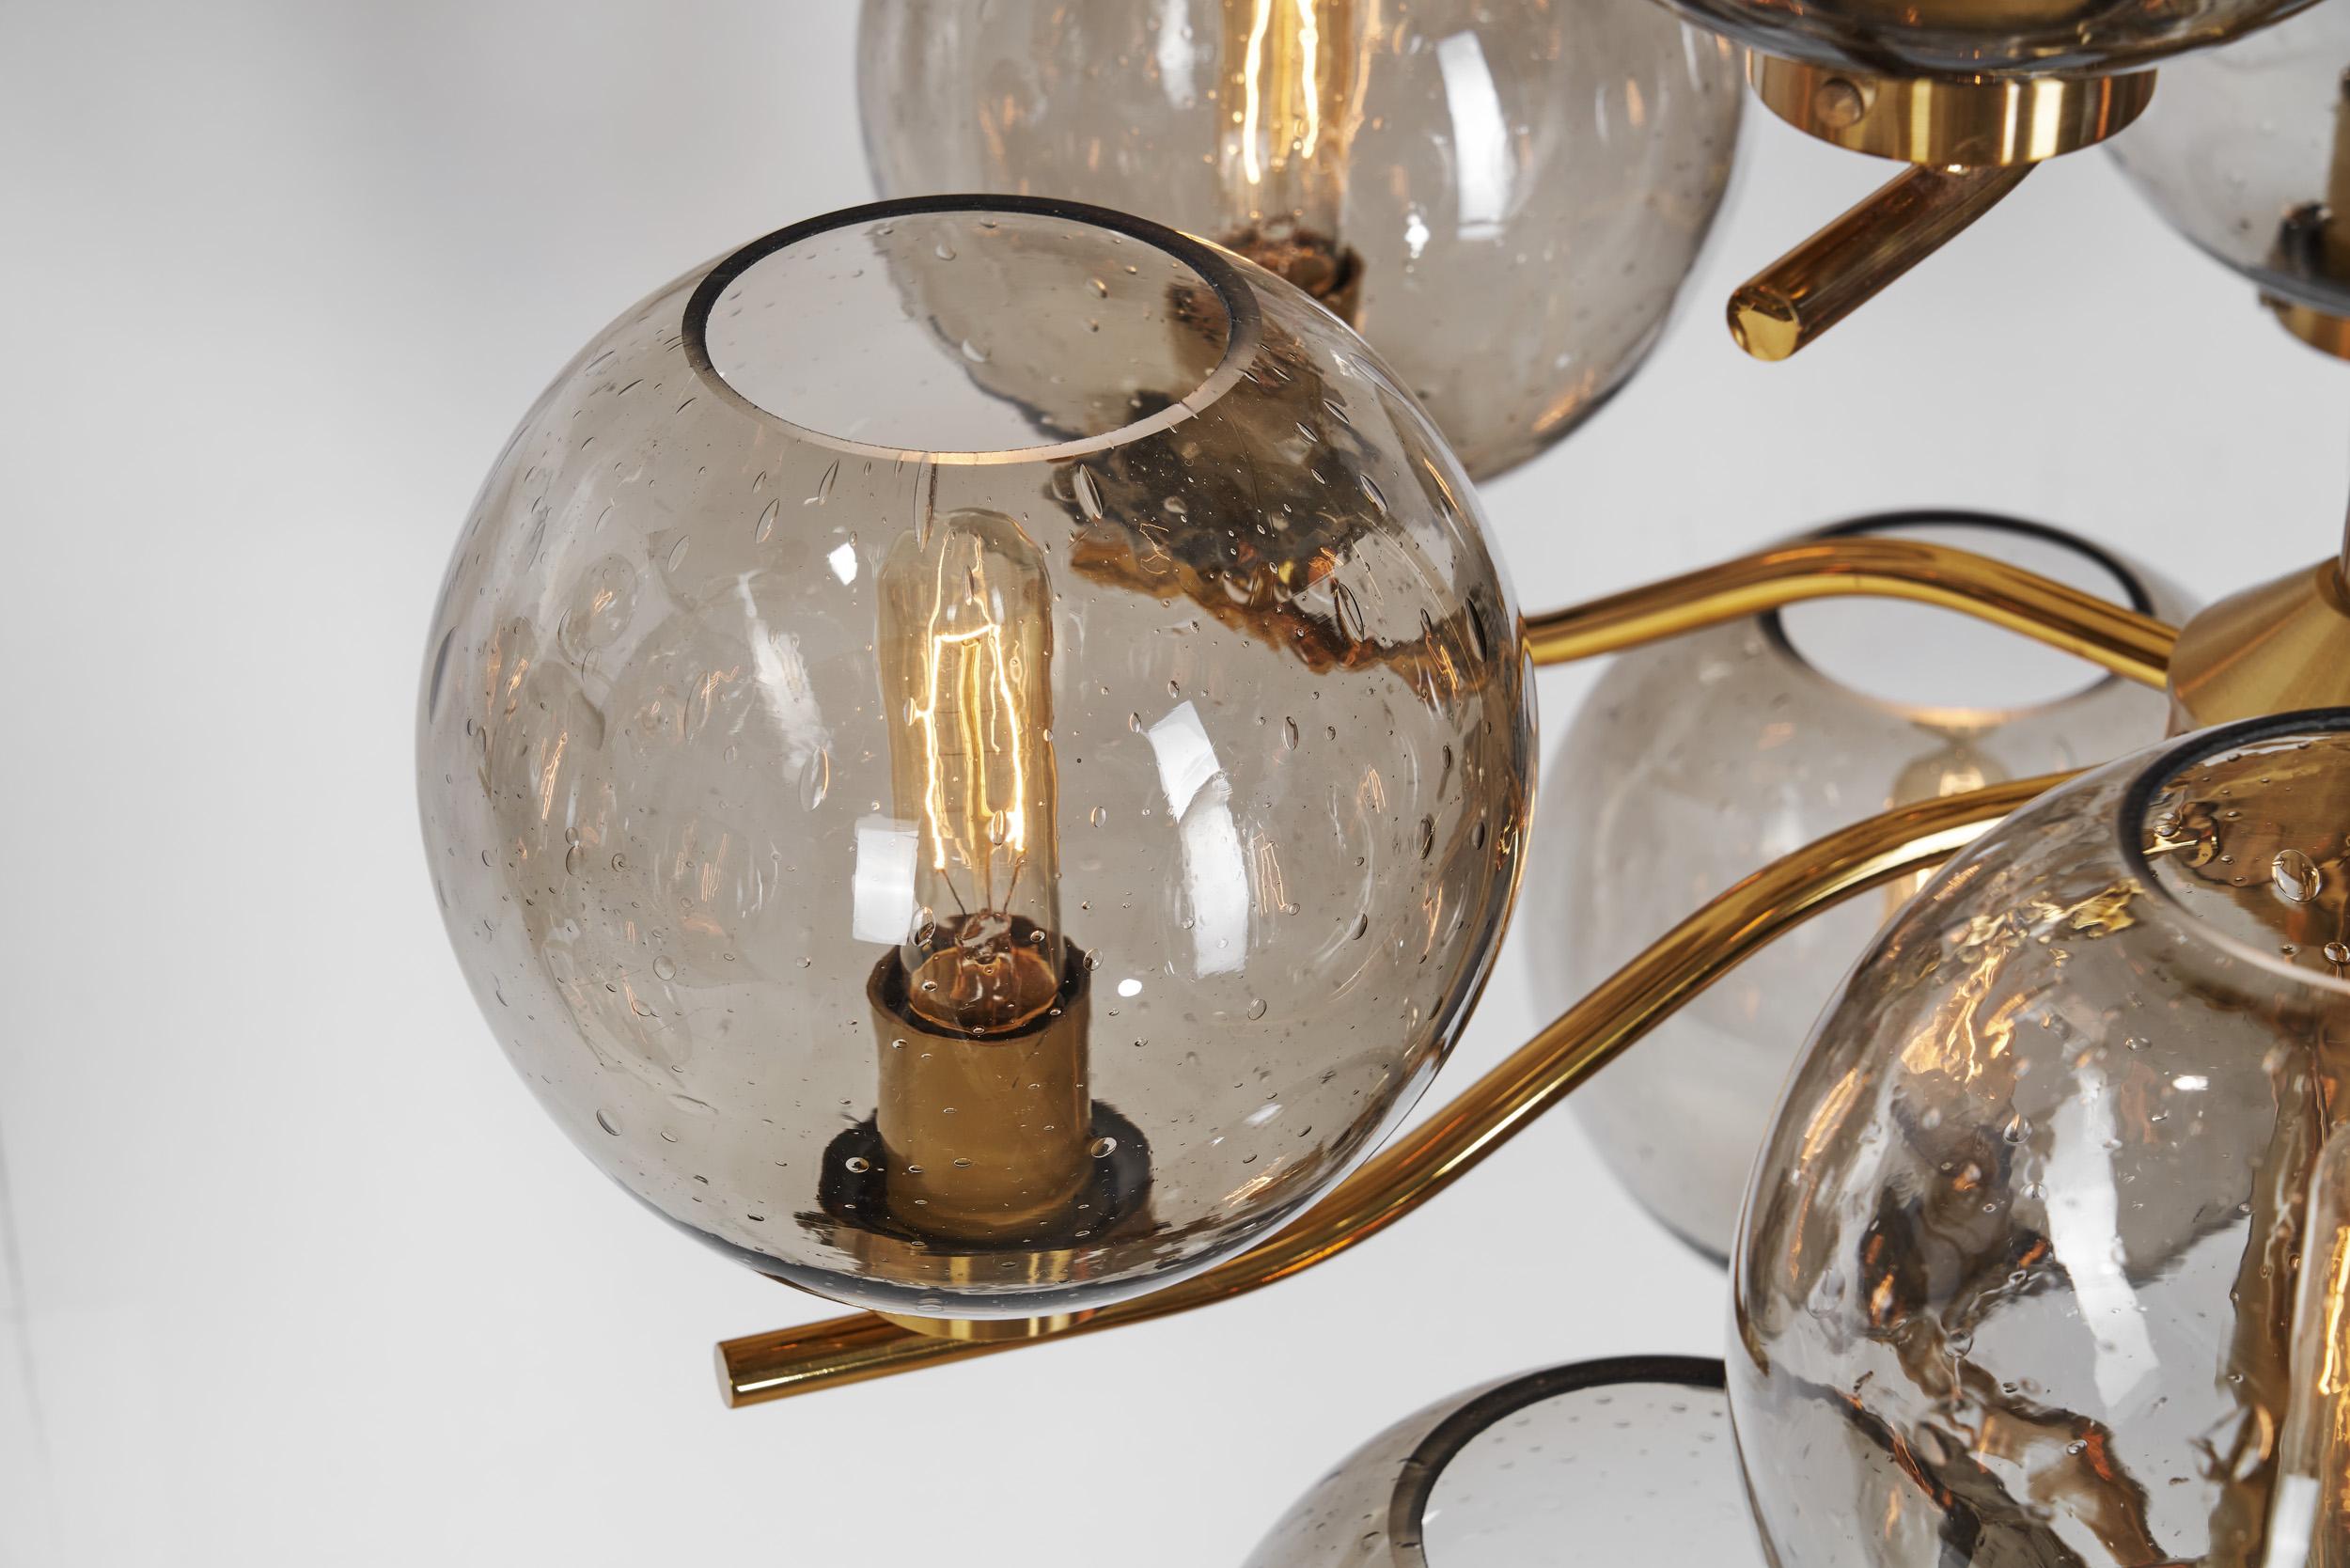 Holger Johansson Set of 4 Chandeliers with Glass Shades for Westal, Sweden 1970s For Sale 2